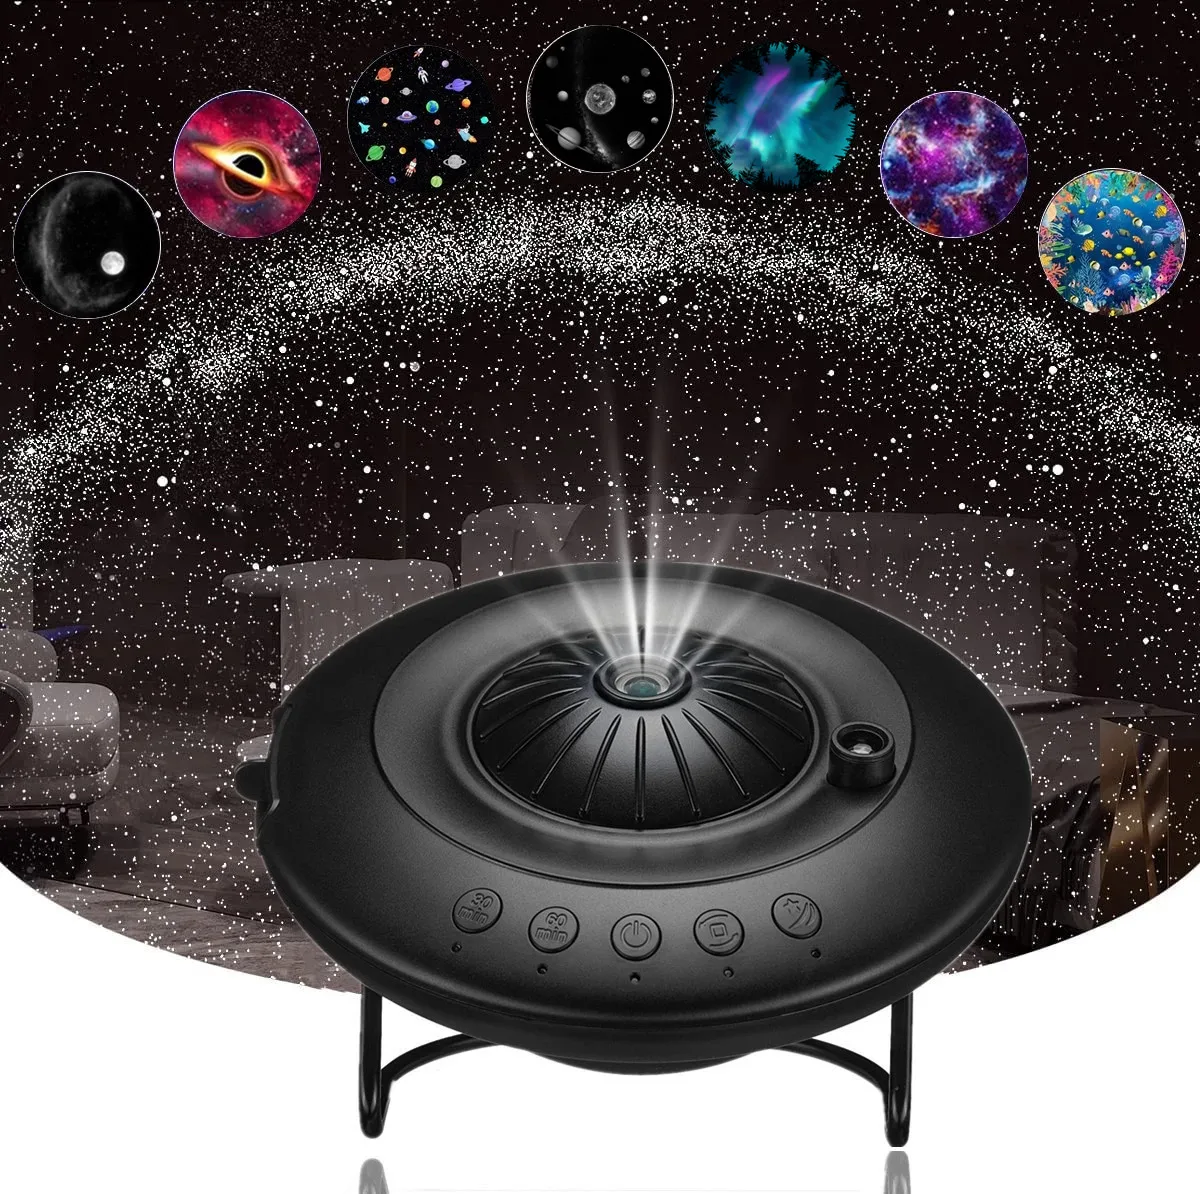 8 in 1 Planetarium Star Projector 360° Adjustable Galaxy Projector Night Light Planets LED Lamp for Kids Gift Bedroom Home Decor